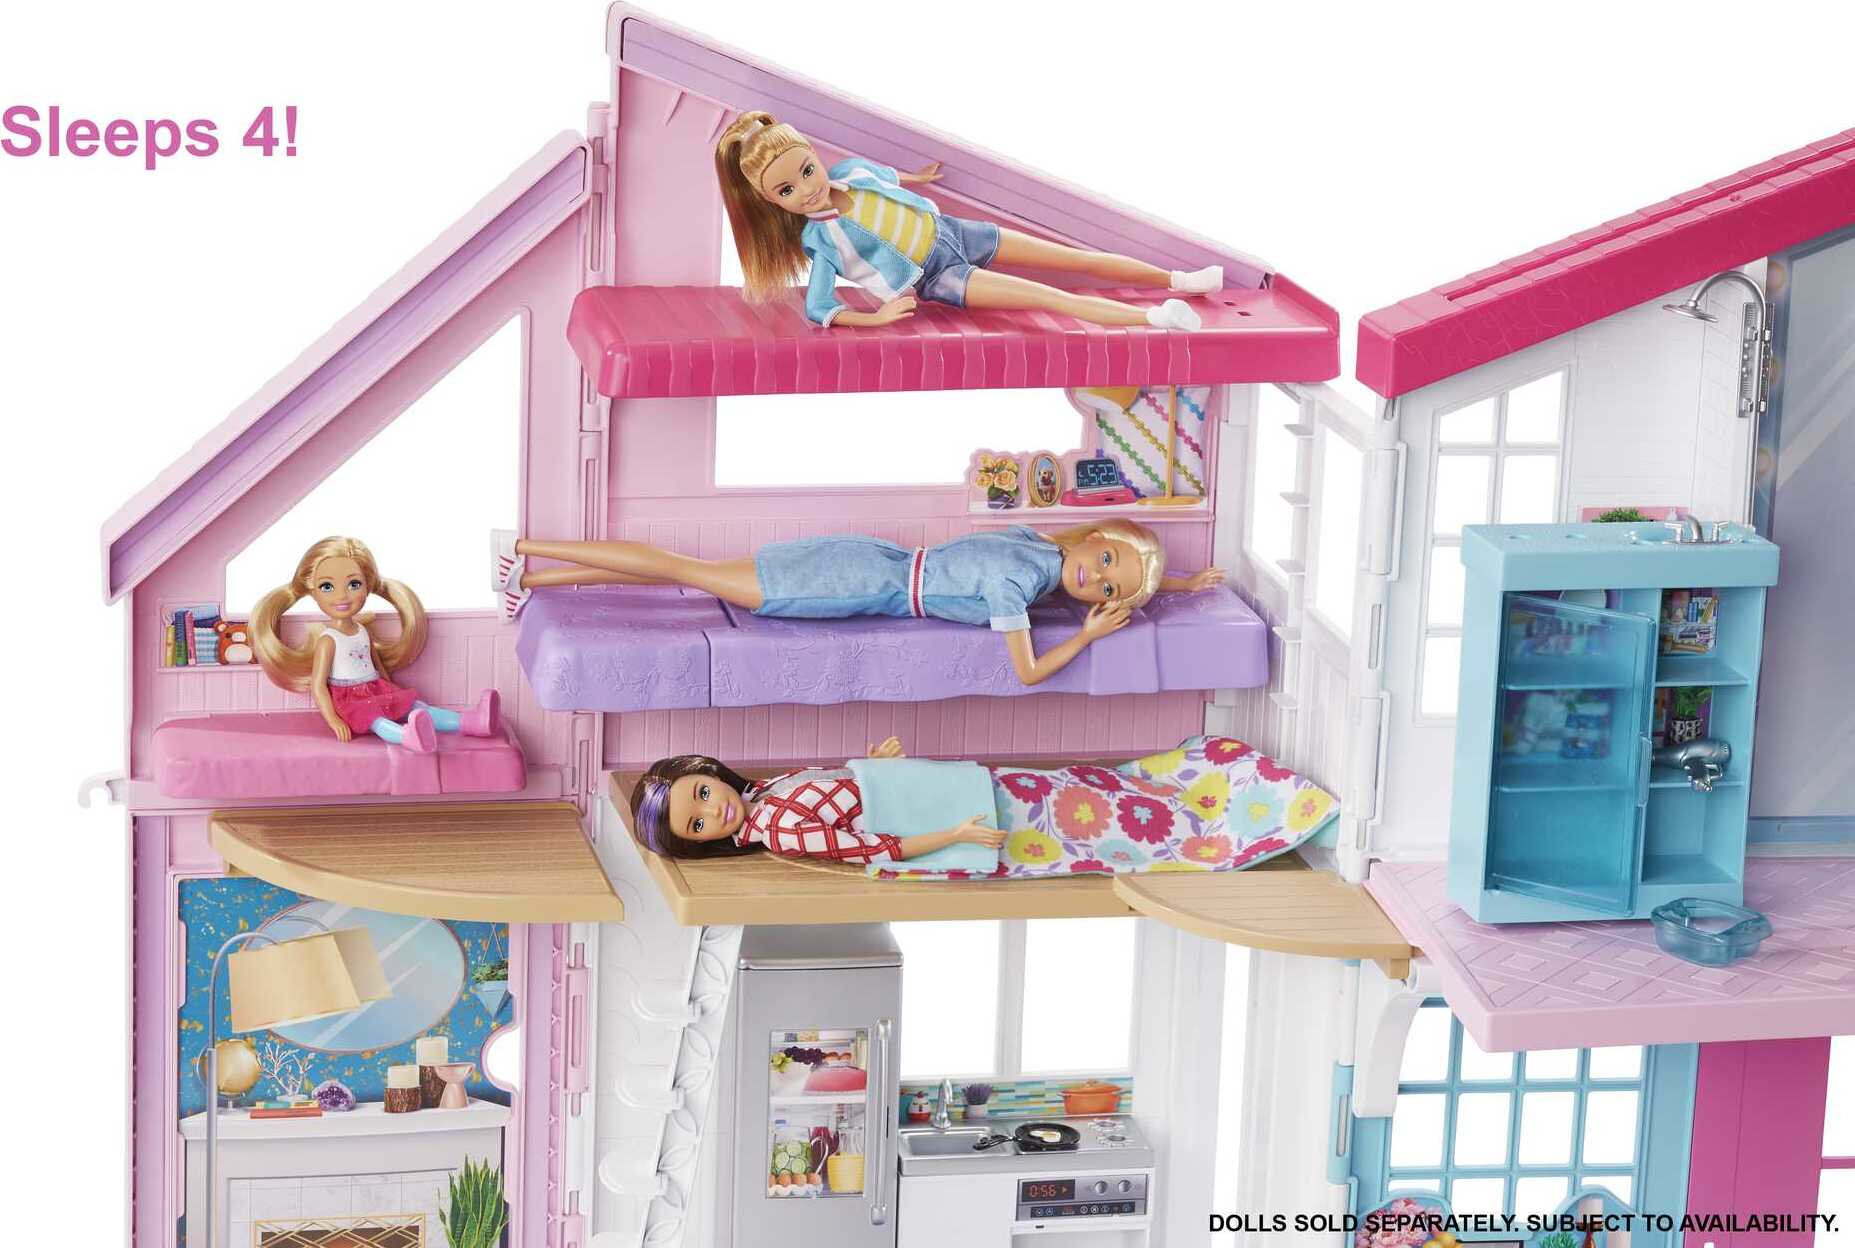 Barbie Malibu House Dollhouse Playset with 25+ Furniture and Accessories (6 Rooms) - image 6 of 8